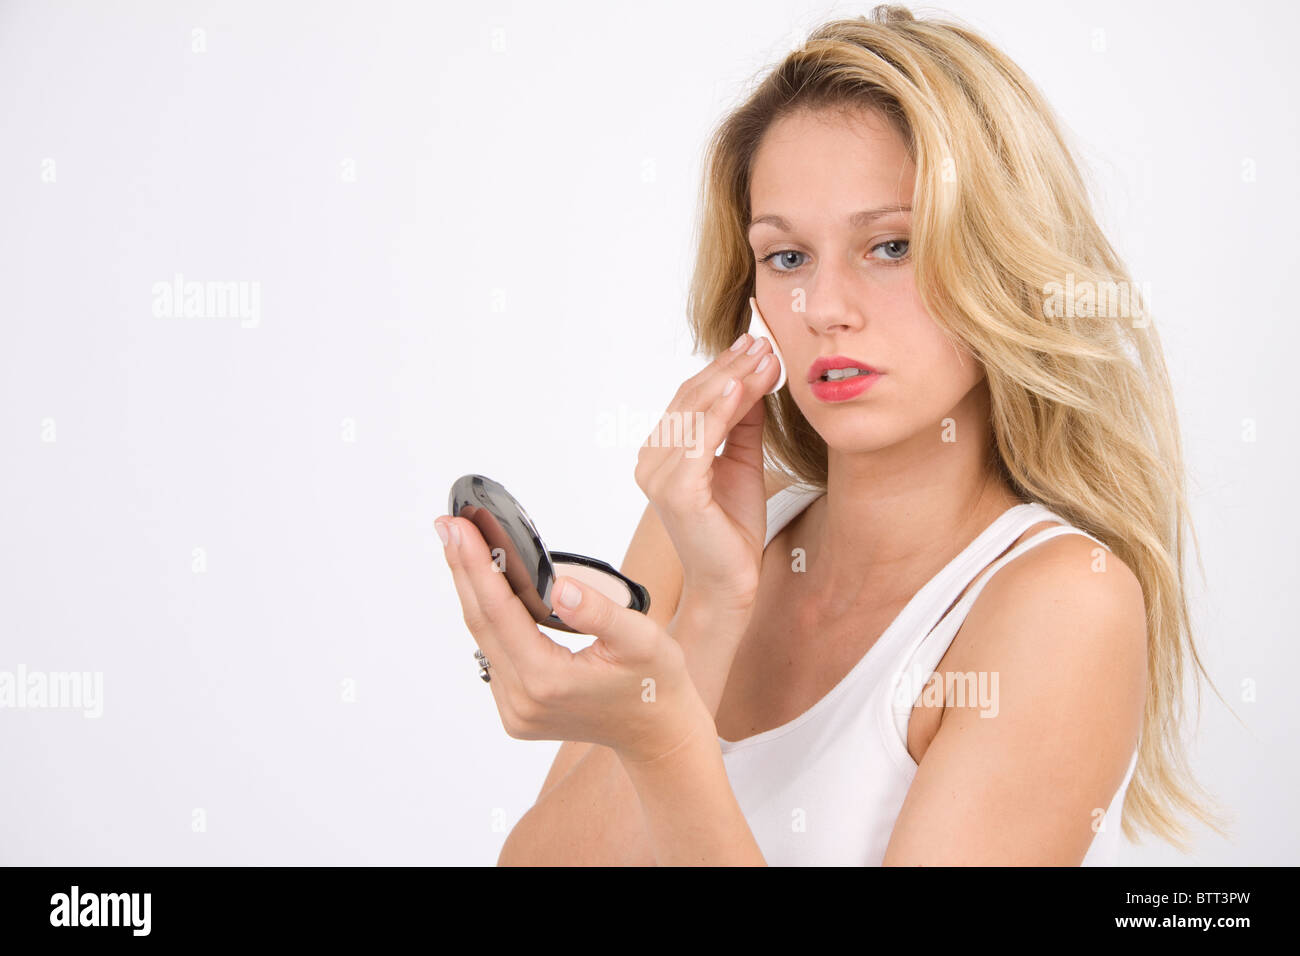 beauty care and cosmetics Stock Photo